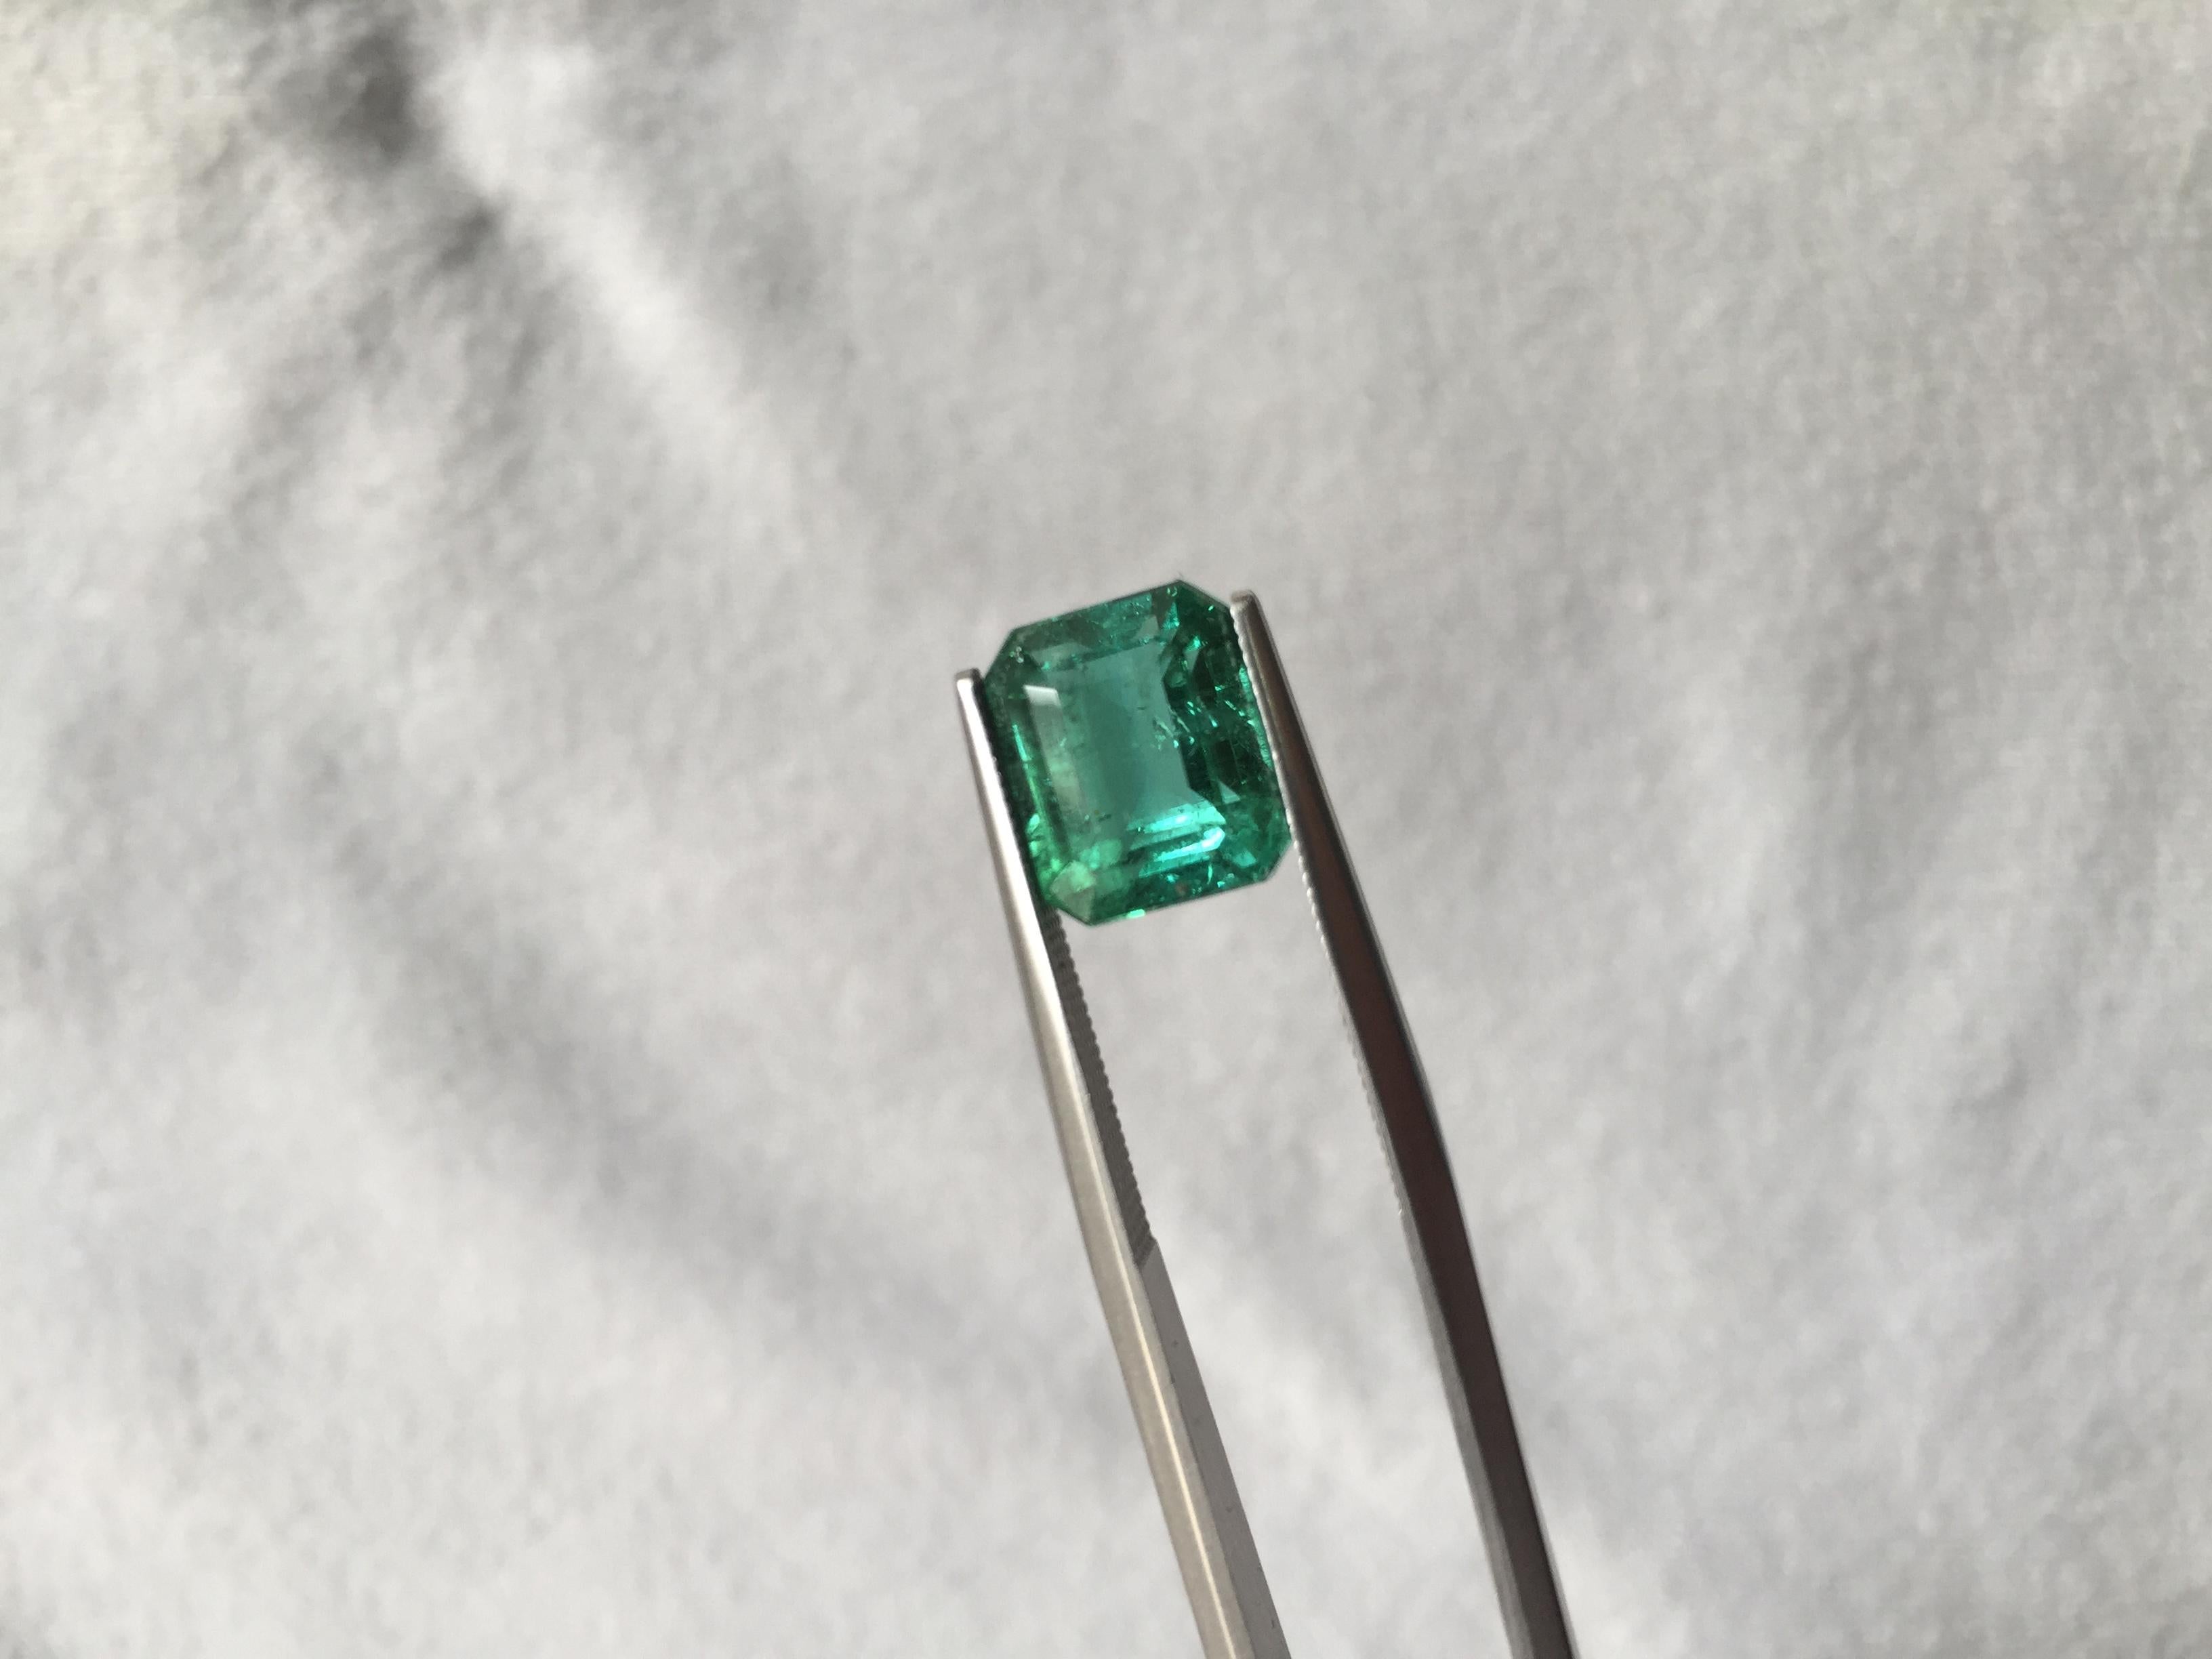 This high-quality tourmaline, this gemstone boasts a stunning green hue that is perfect for your fine jewelry collection. The natural beauty of the green tourmaline is truly remarkable, with its rich color and clarity which is loose clean.

We hope